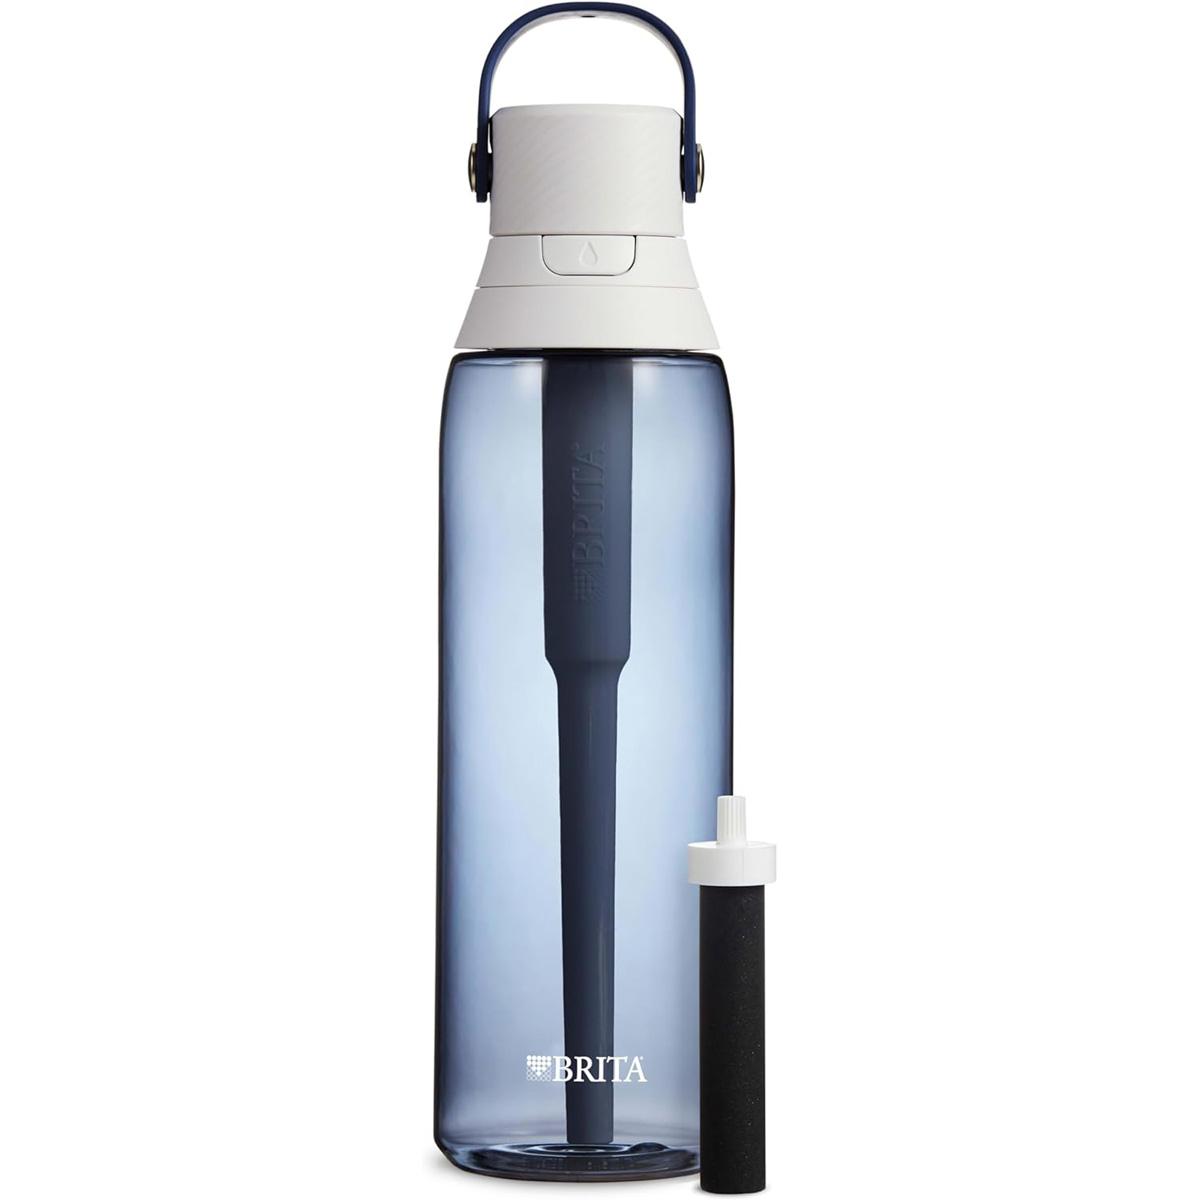 Brita Insulated Filtered Water Bottle with Straw for $12.89